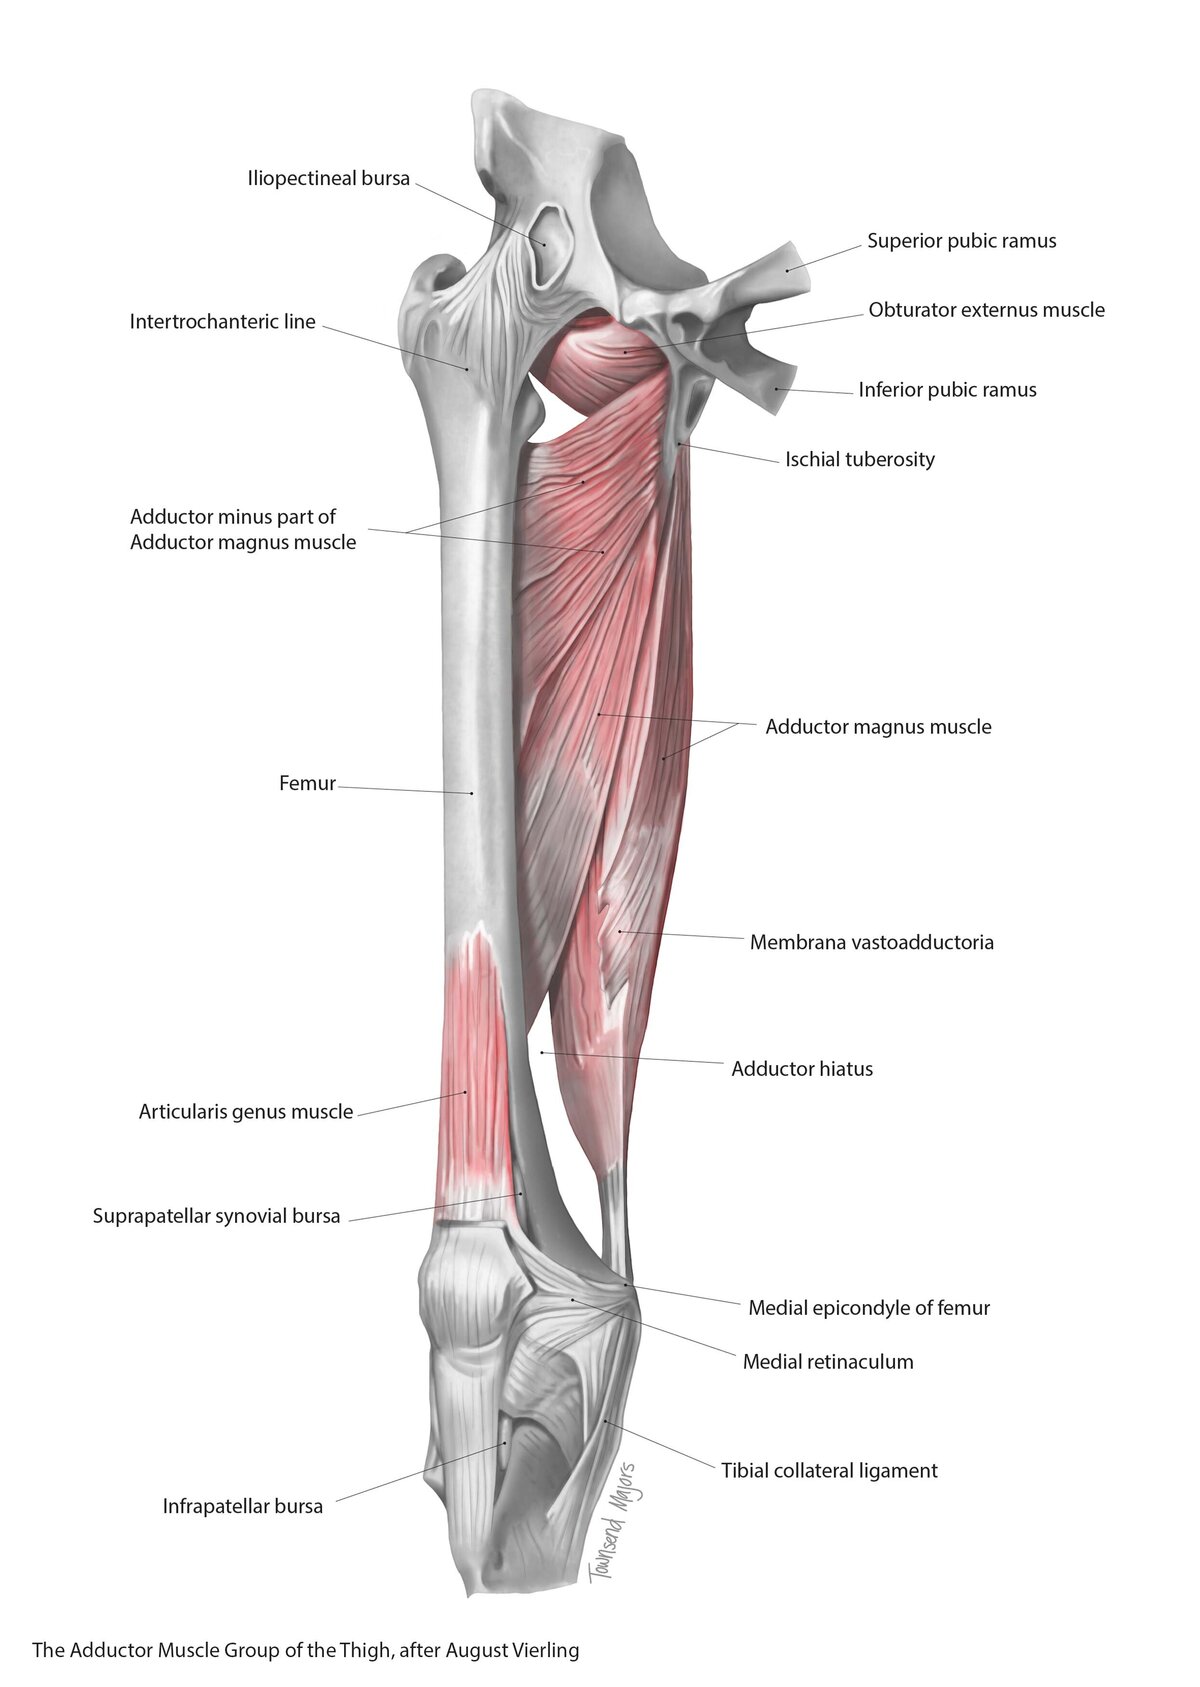 townsend-majors-adductor-muscles